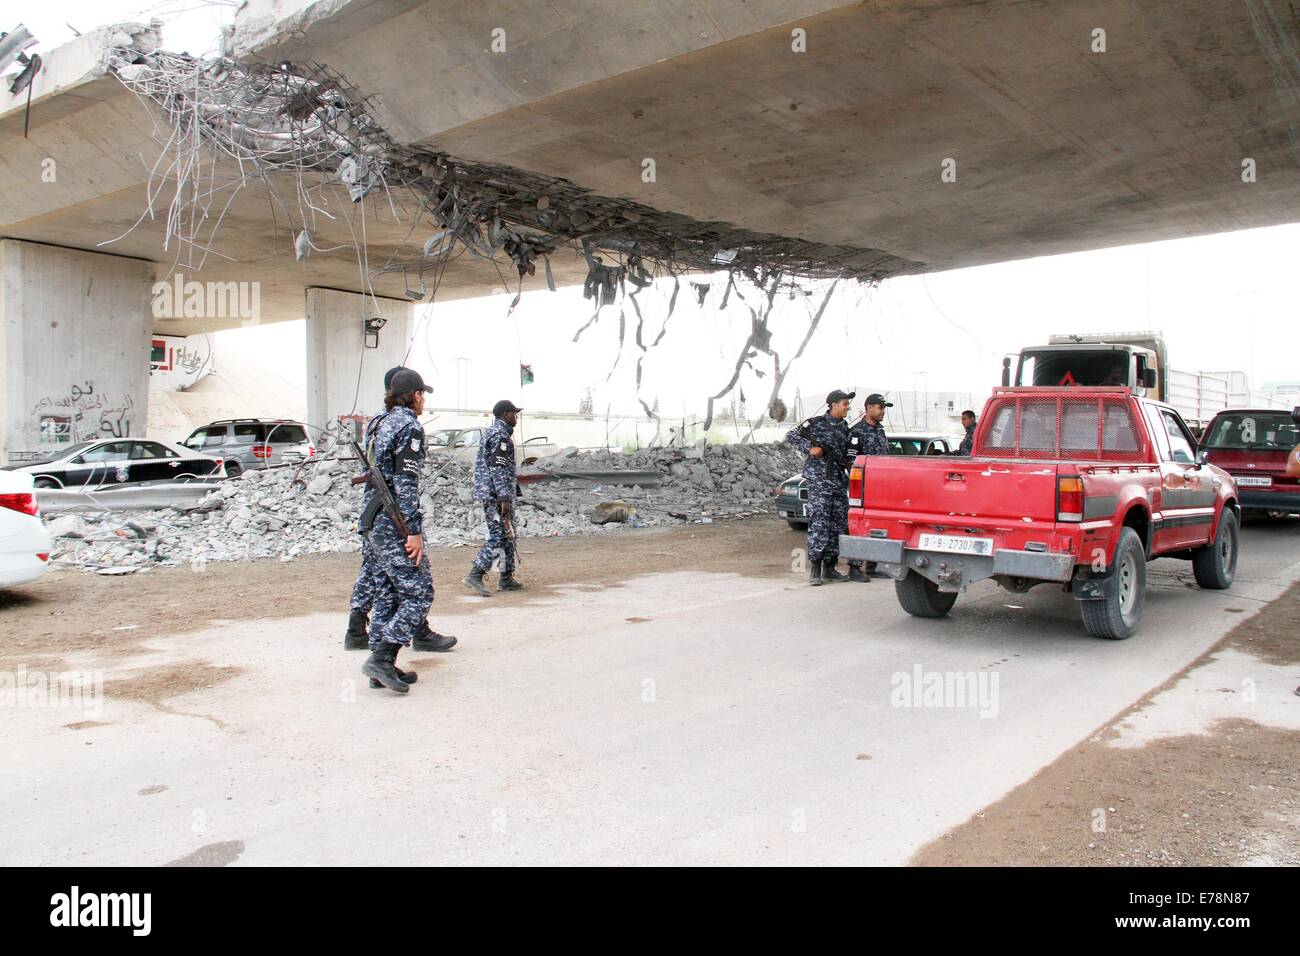 (140909) -- TRIPOLI, Sept. 9 (Xinhua) -- Policemen inspect cars under a damaged bridge in Tripoli, Libya, on Sept. 9, 2014. A number of checkpoints were set up on some key roads in Tripoli by local policemen to maintain the security in the capital city. Since July, Tripoli has been seeing bloody clashes between armed Islamist groups and pro-secular militias. (Xinhua/Hamza Turkia) Stock Photo